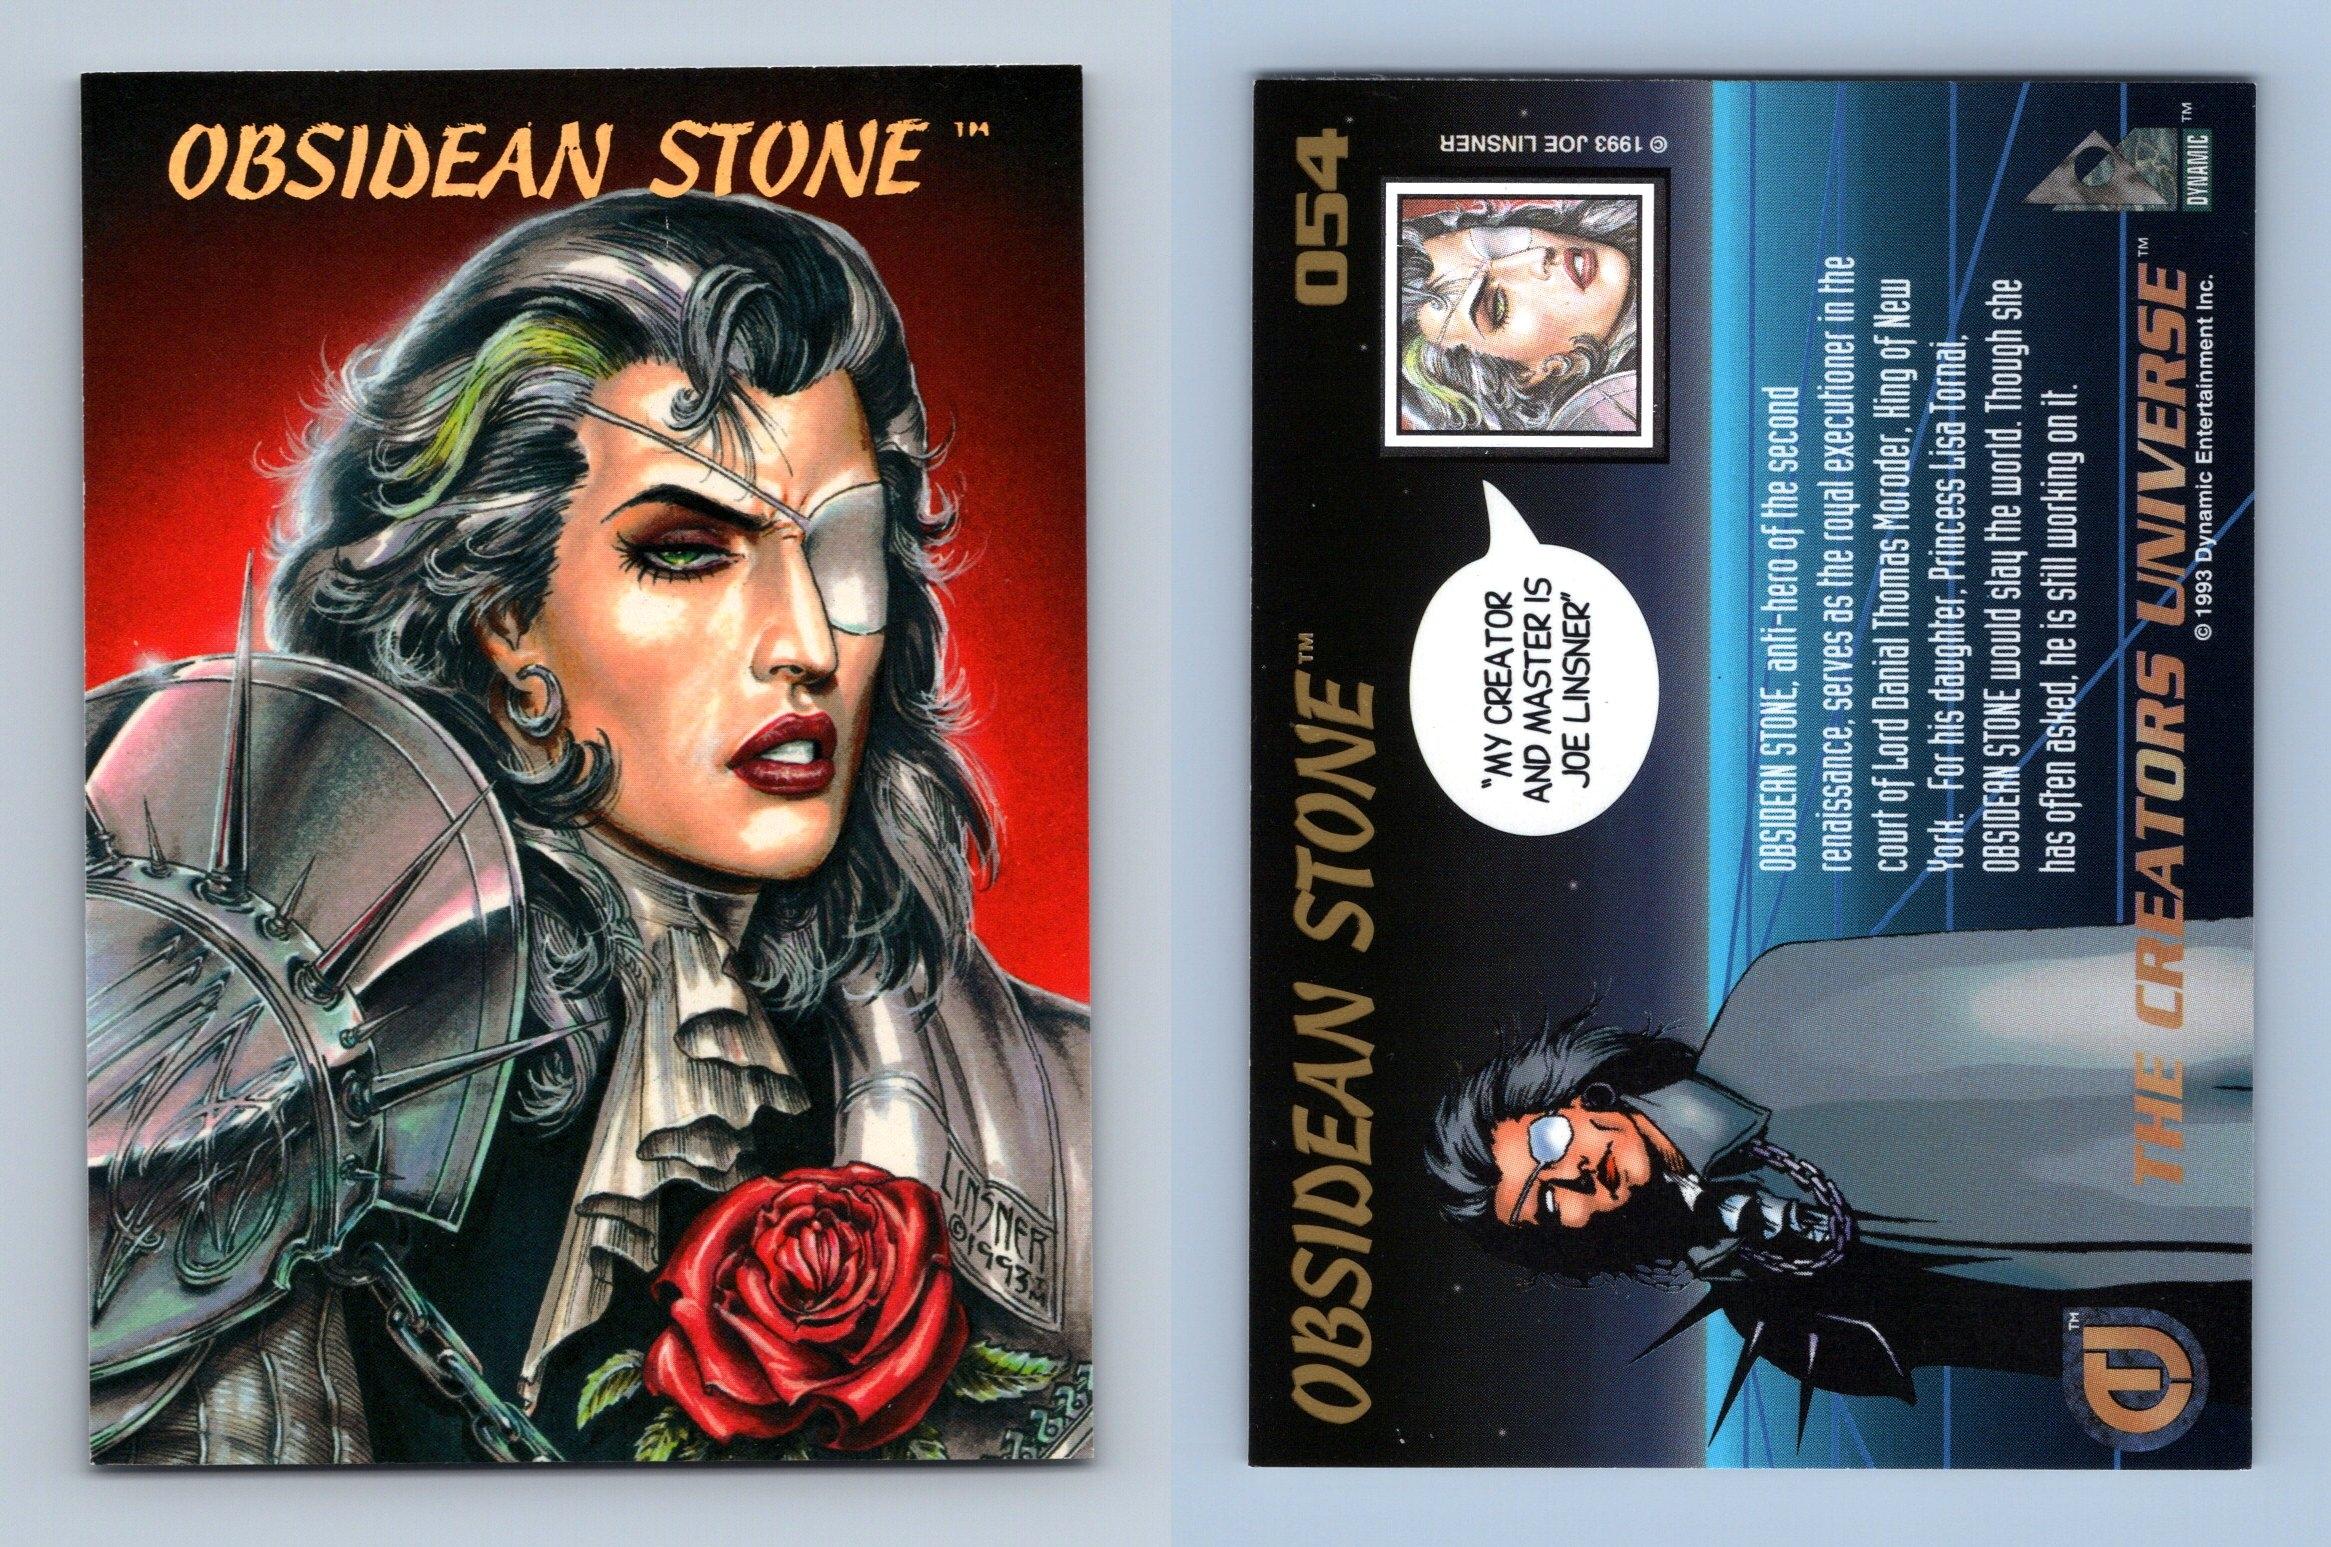 Obsidean Stone #054 The Creators Universe 1993 Dynamic Trading Card - Photo 1/1